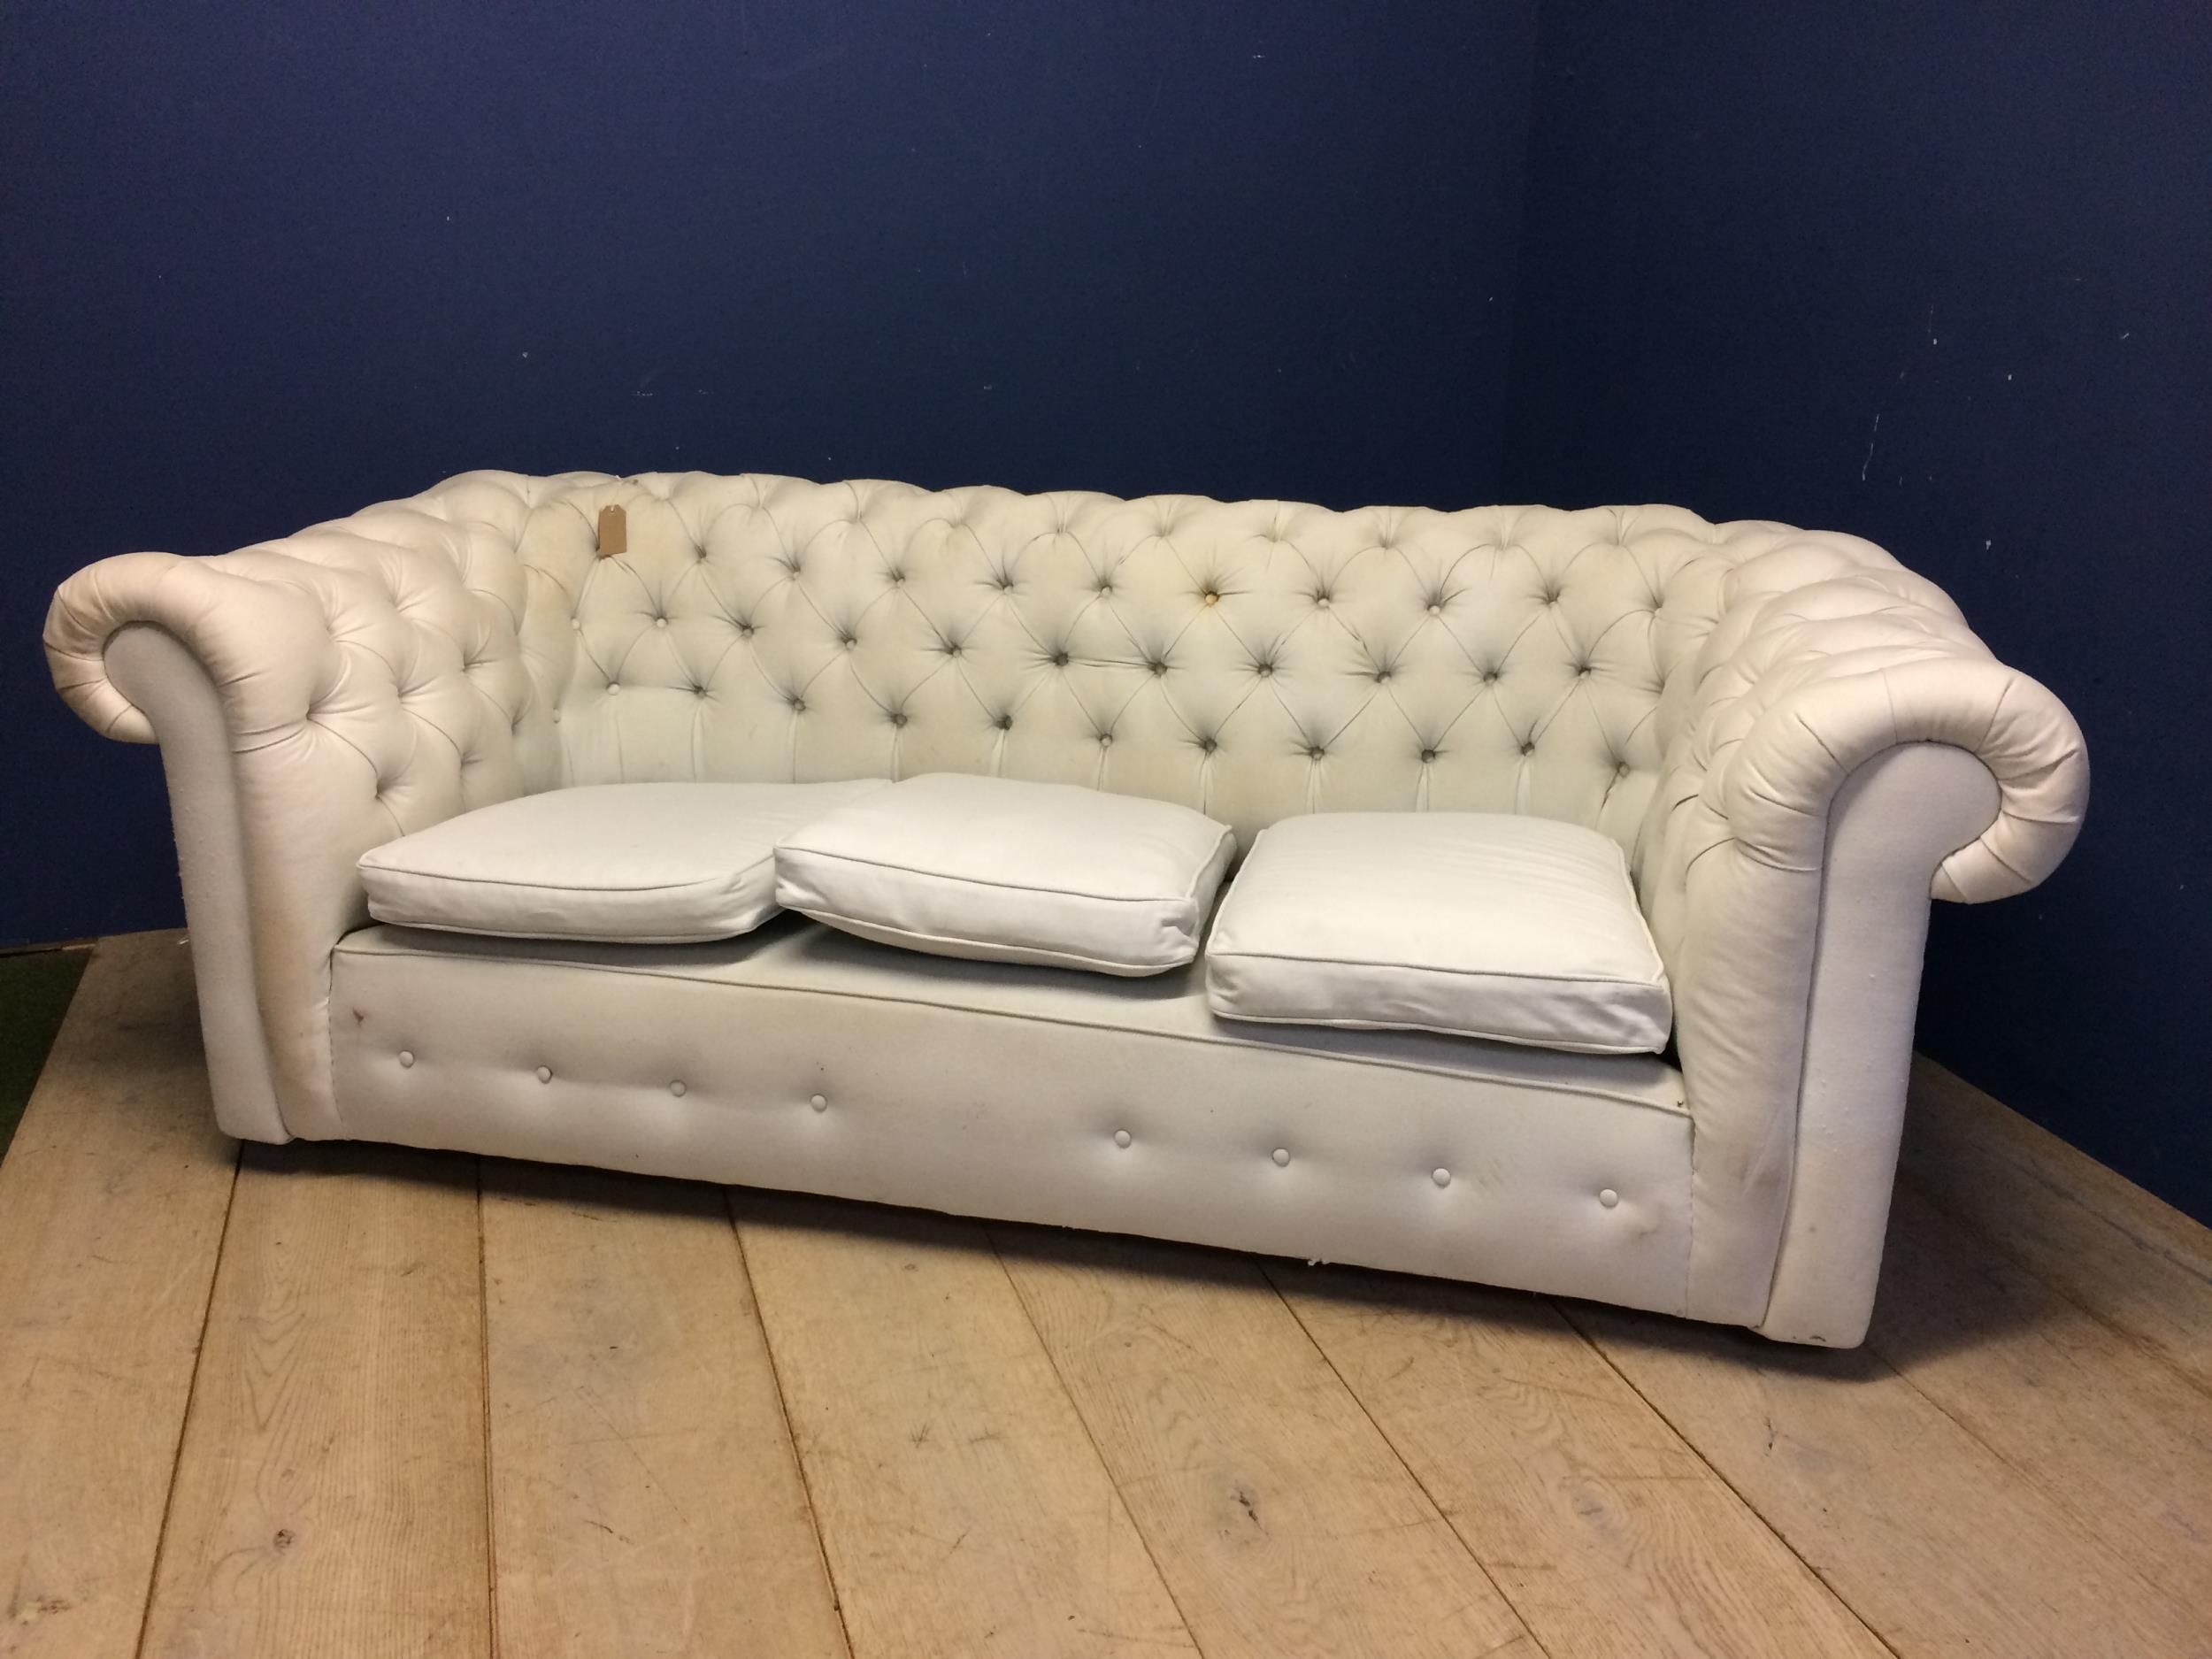 Victorian chesterfield sofa, upholstered in a light coloured fabric (some areas grubby with marks,